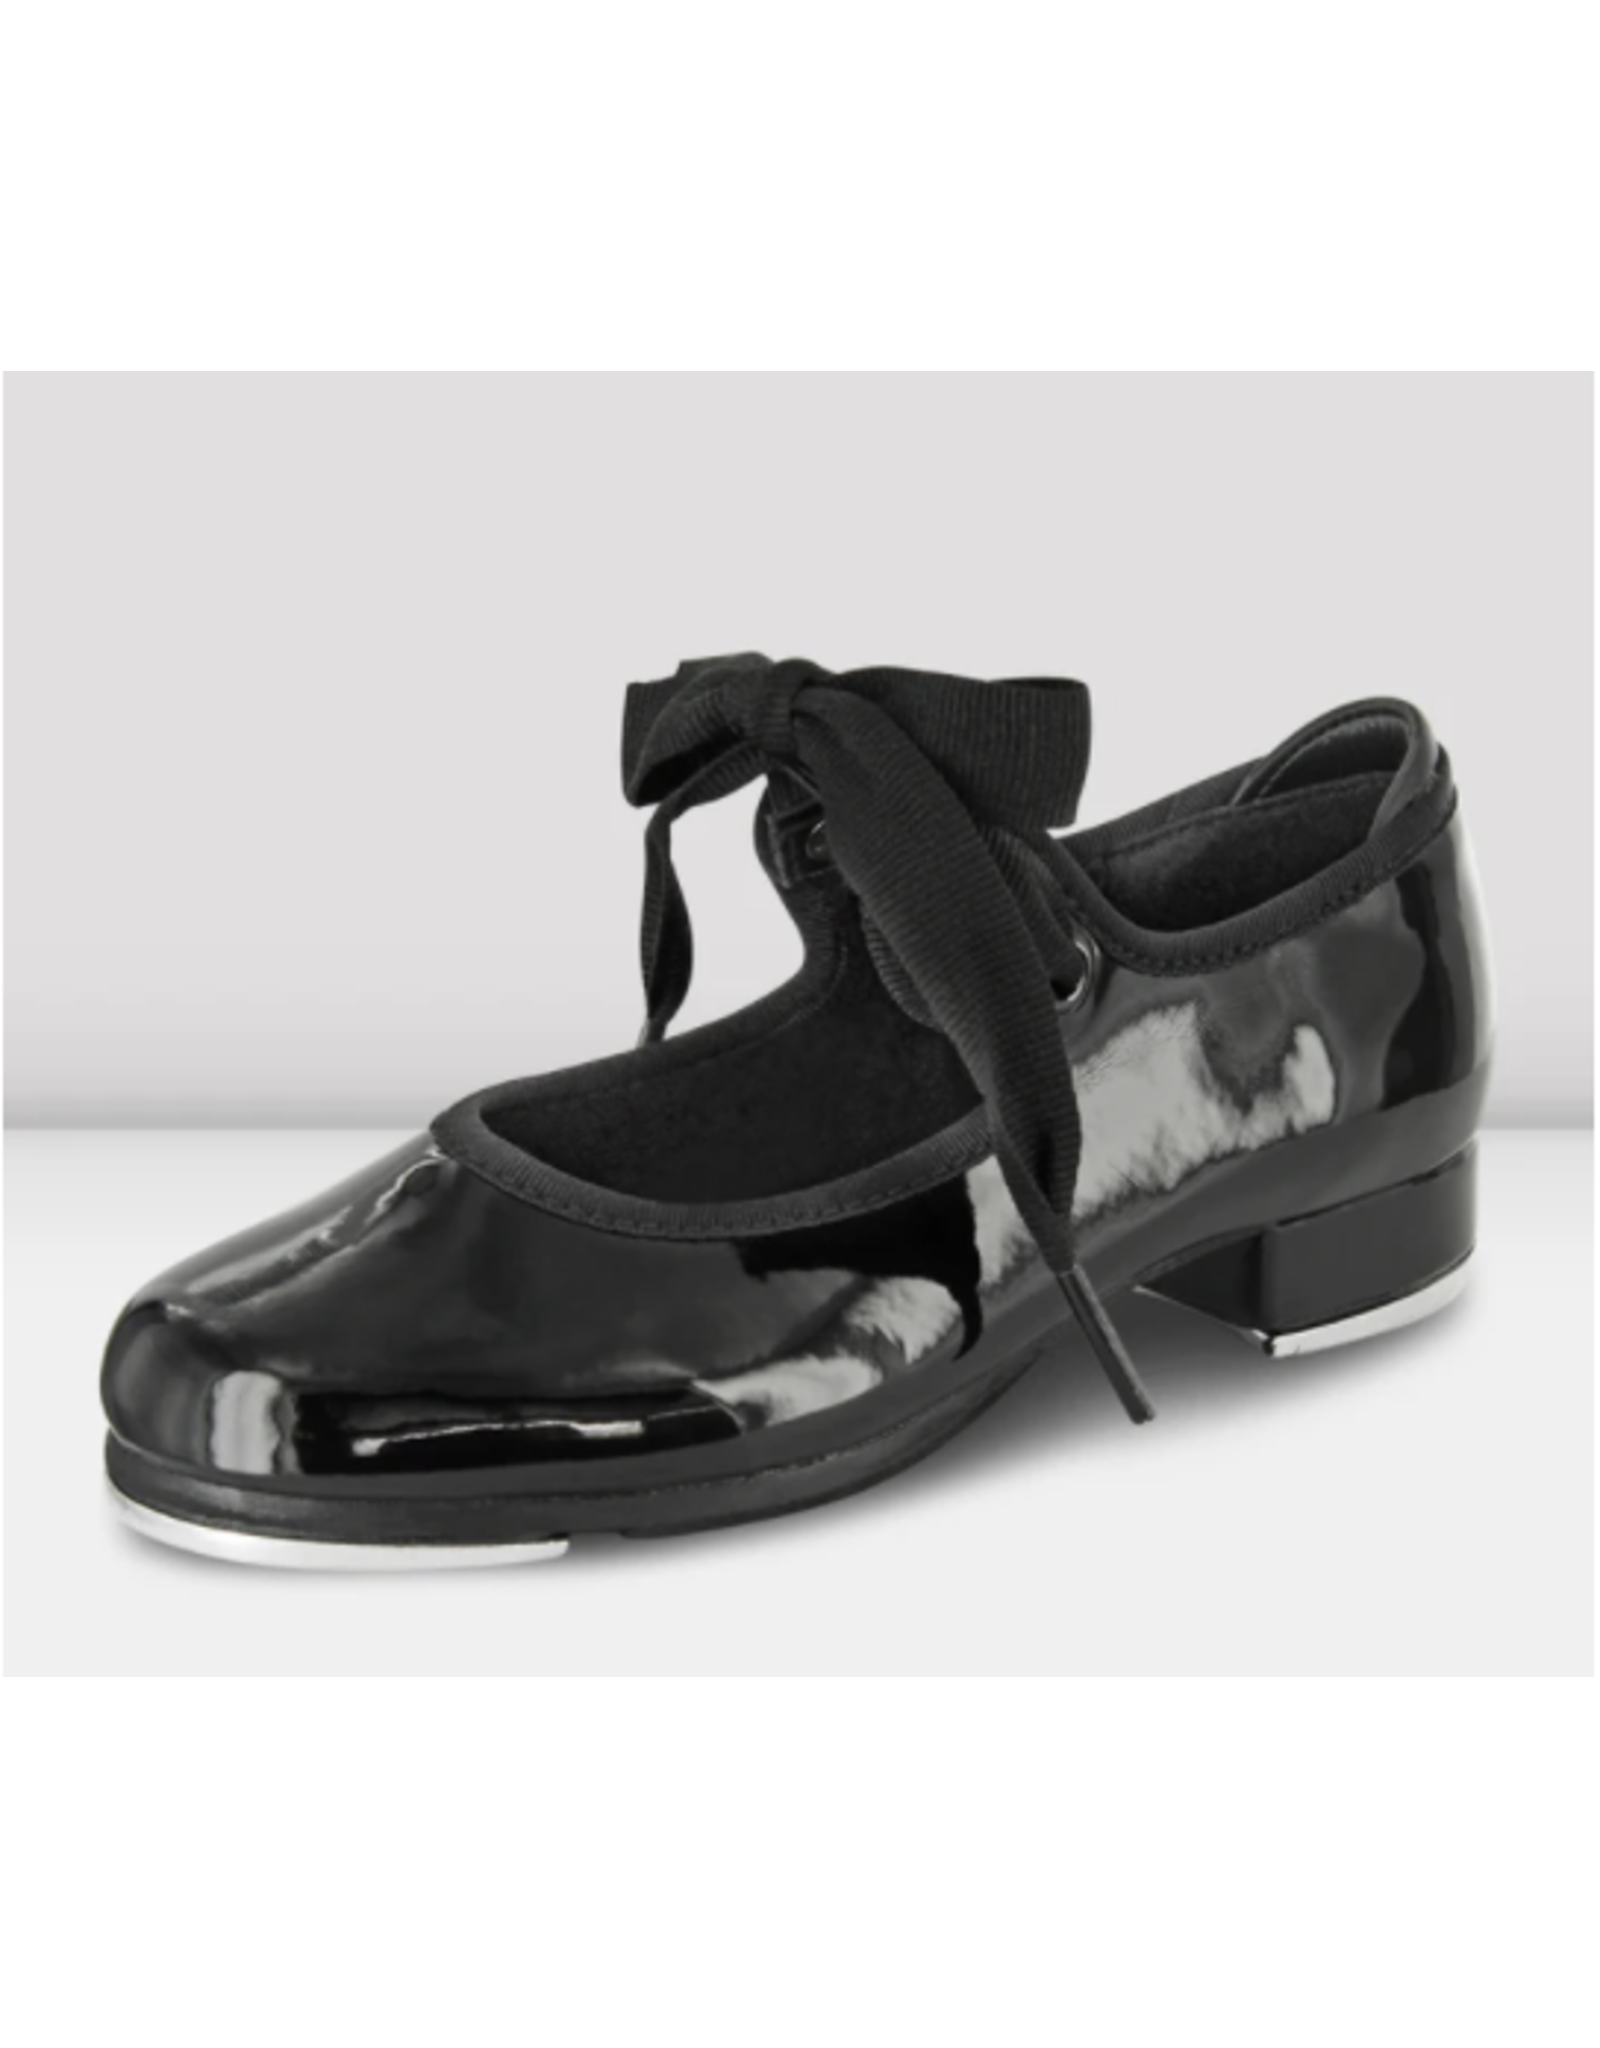 techno tap shoes